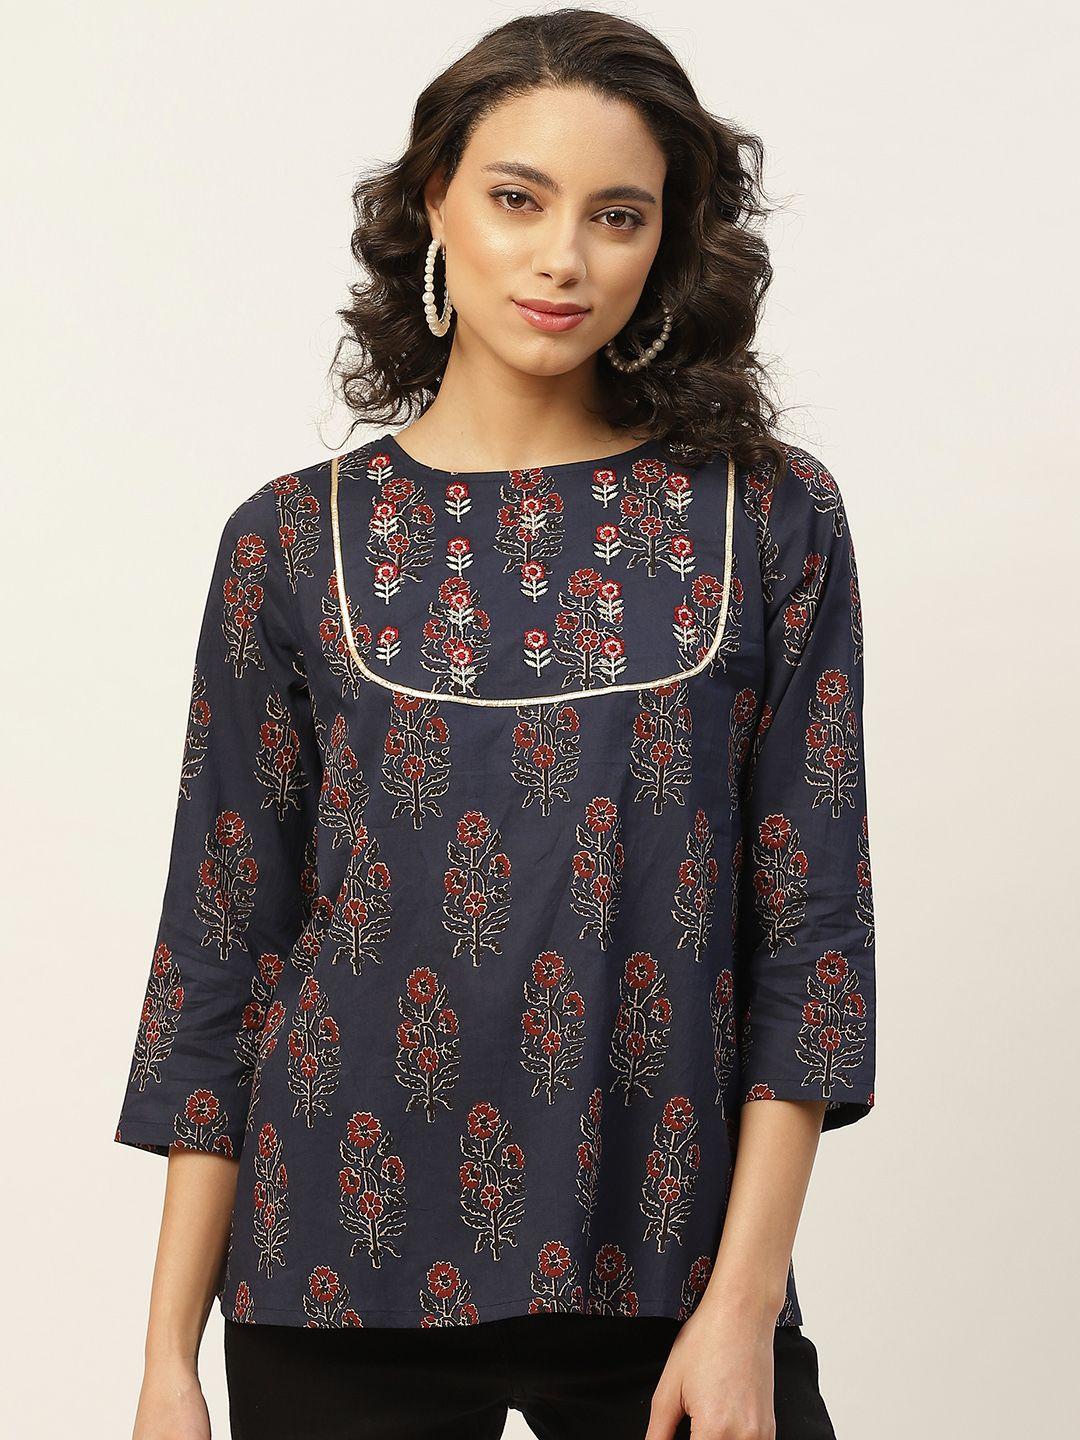 shae by sassafras women navy blue & red printed pure cotton a-line top